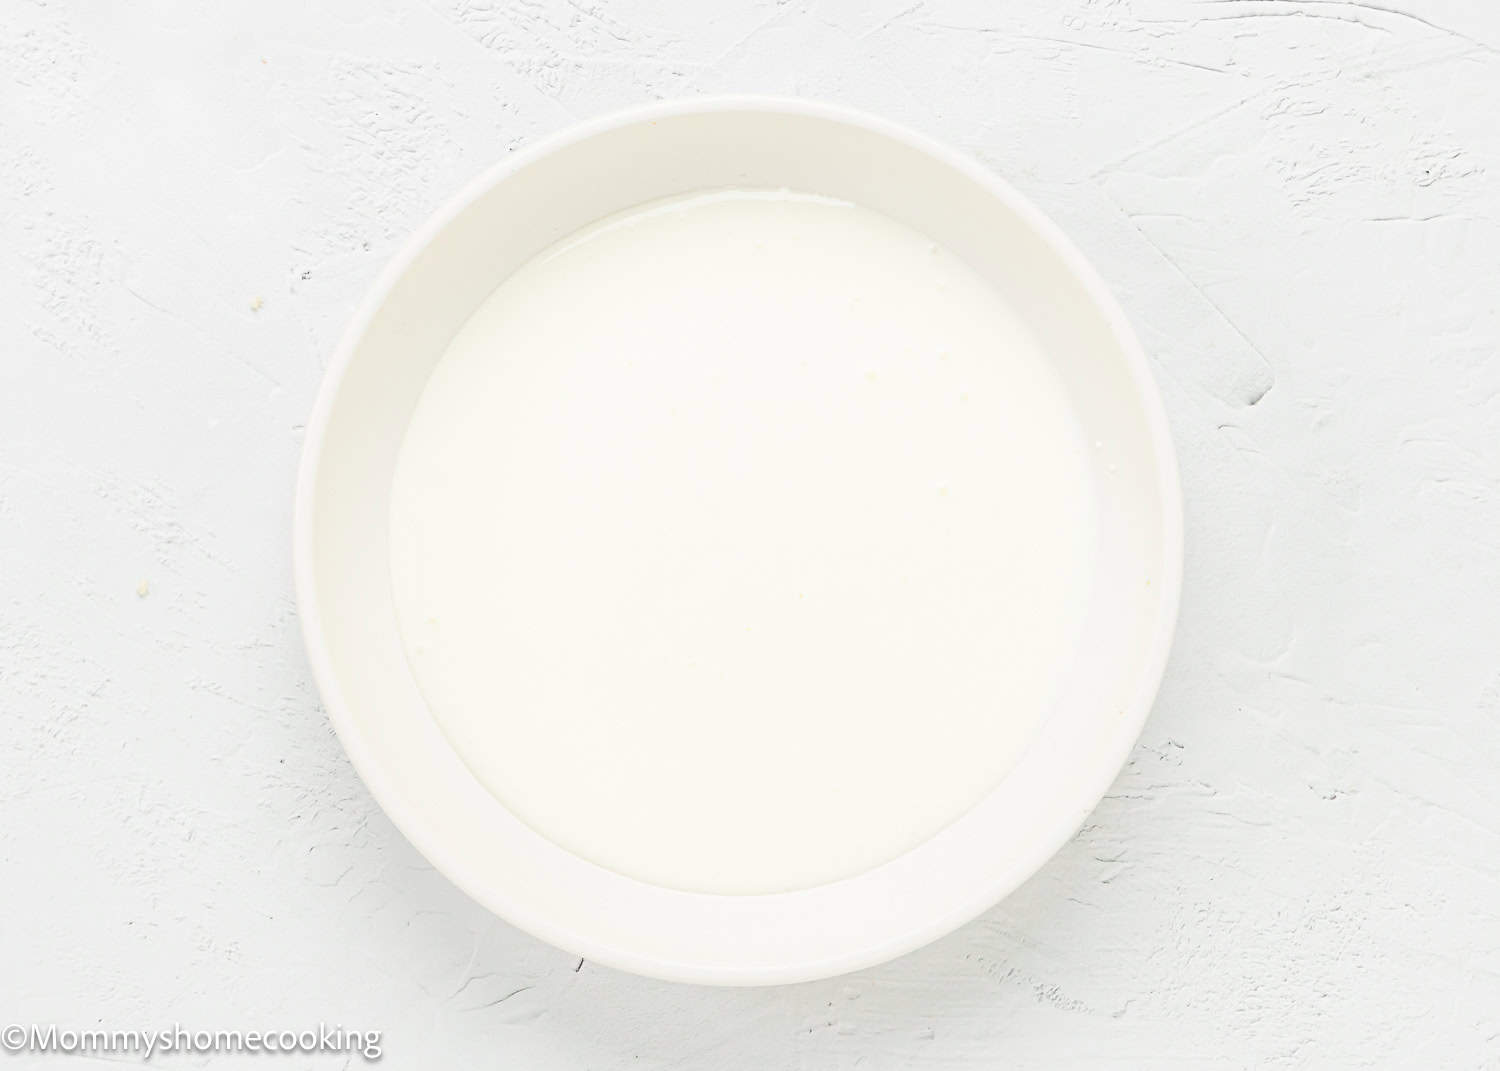 milk and yogurt mix together in a shallow bowl.